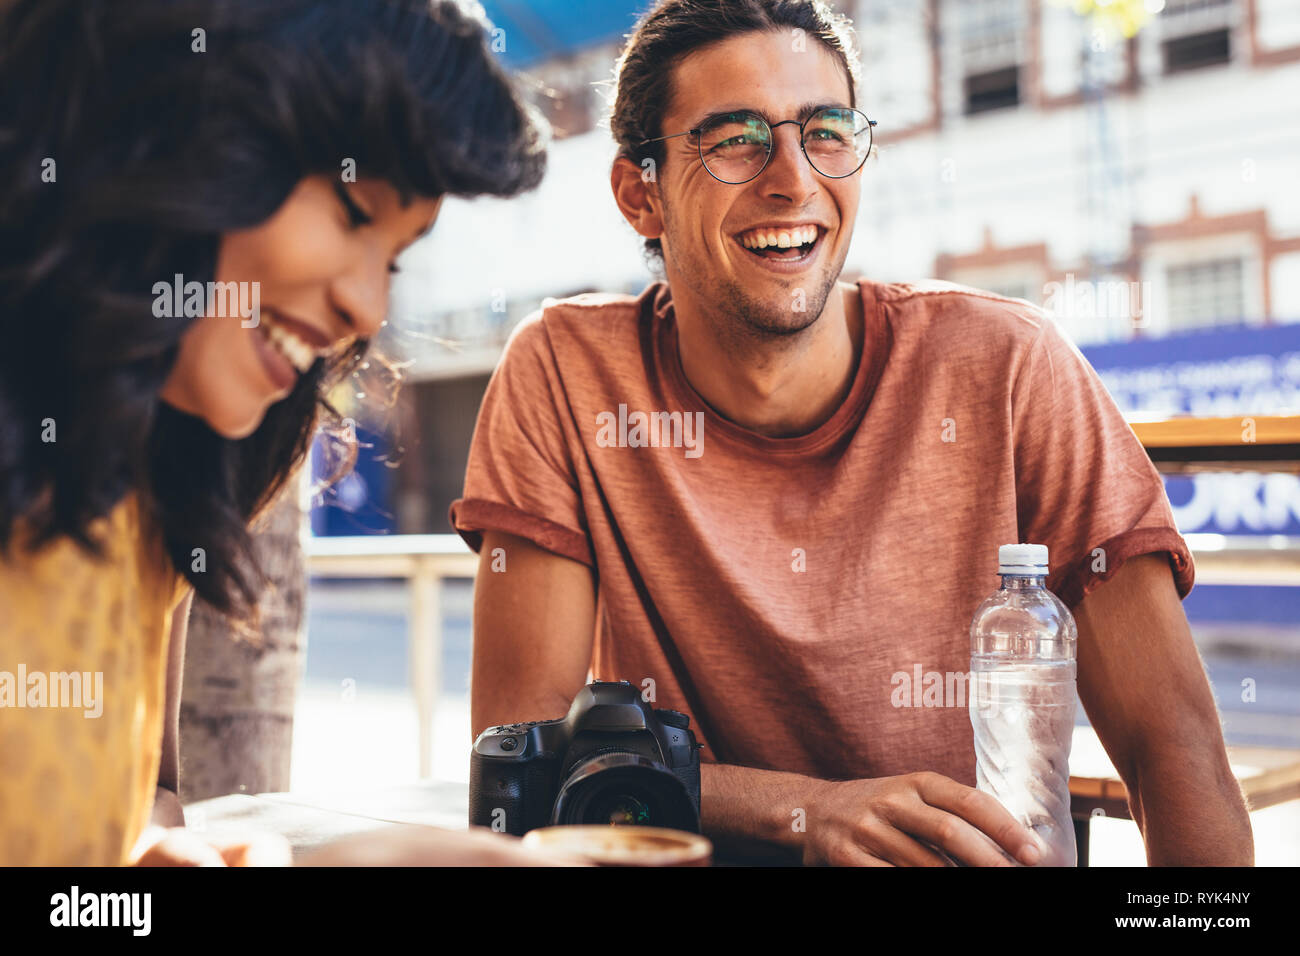 Smiling young man talking with friends at cafe. Creative people meeting at city cafe. Stock Photo